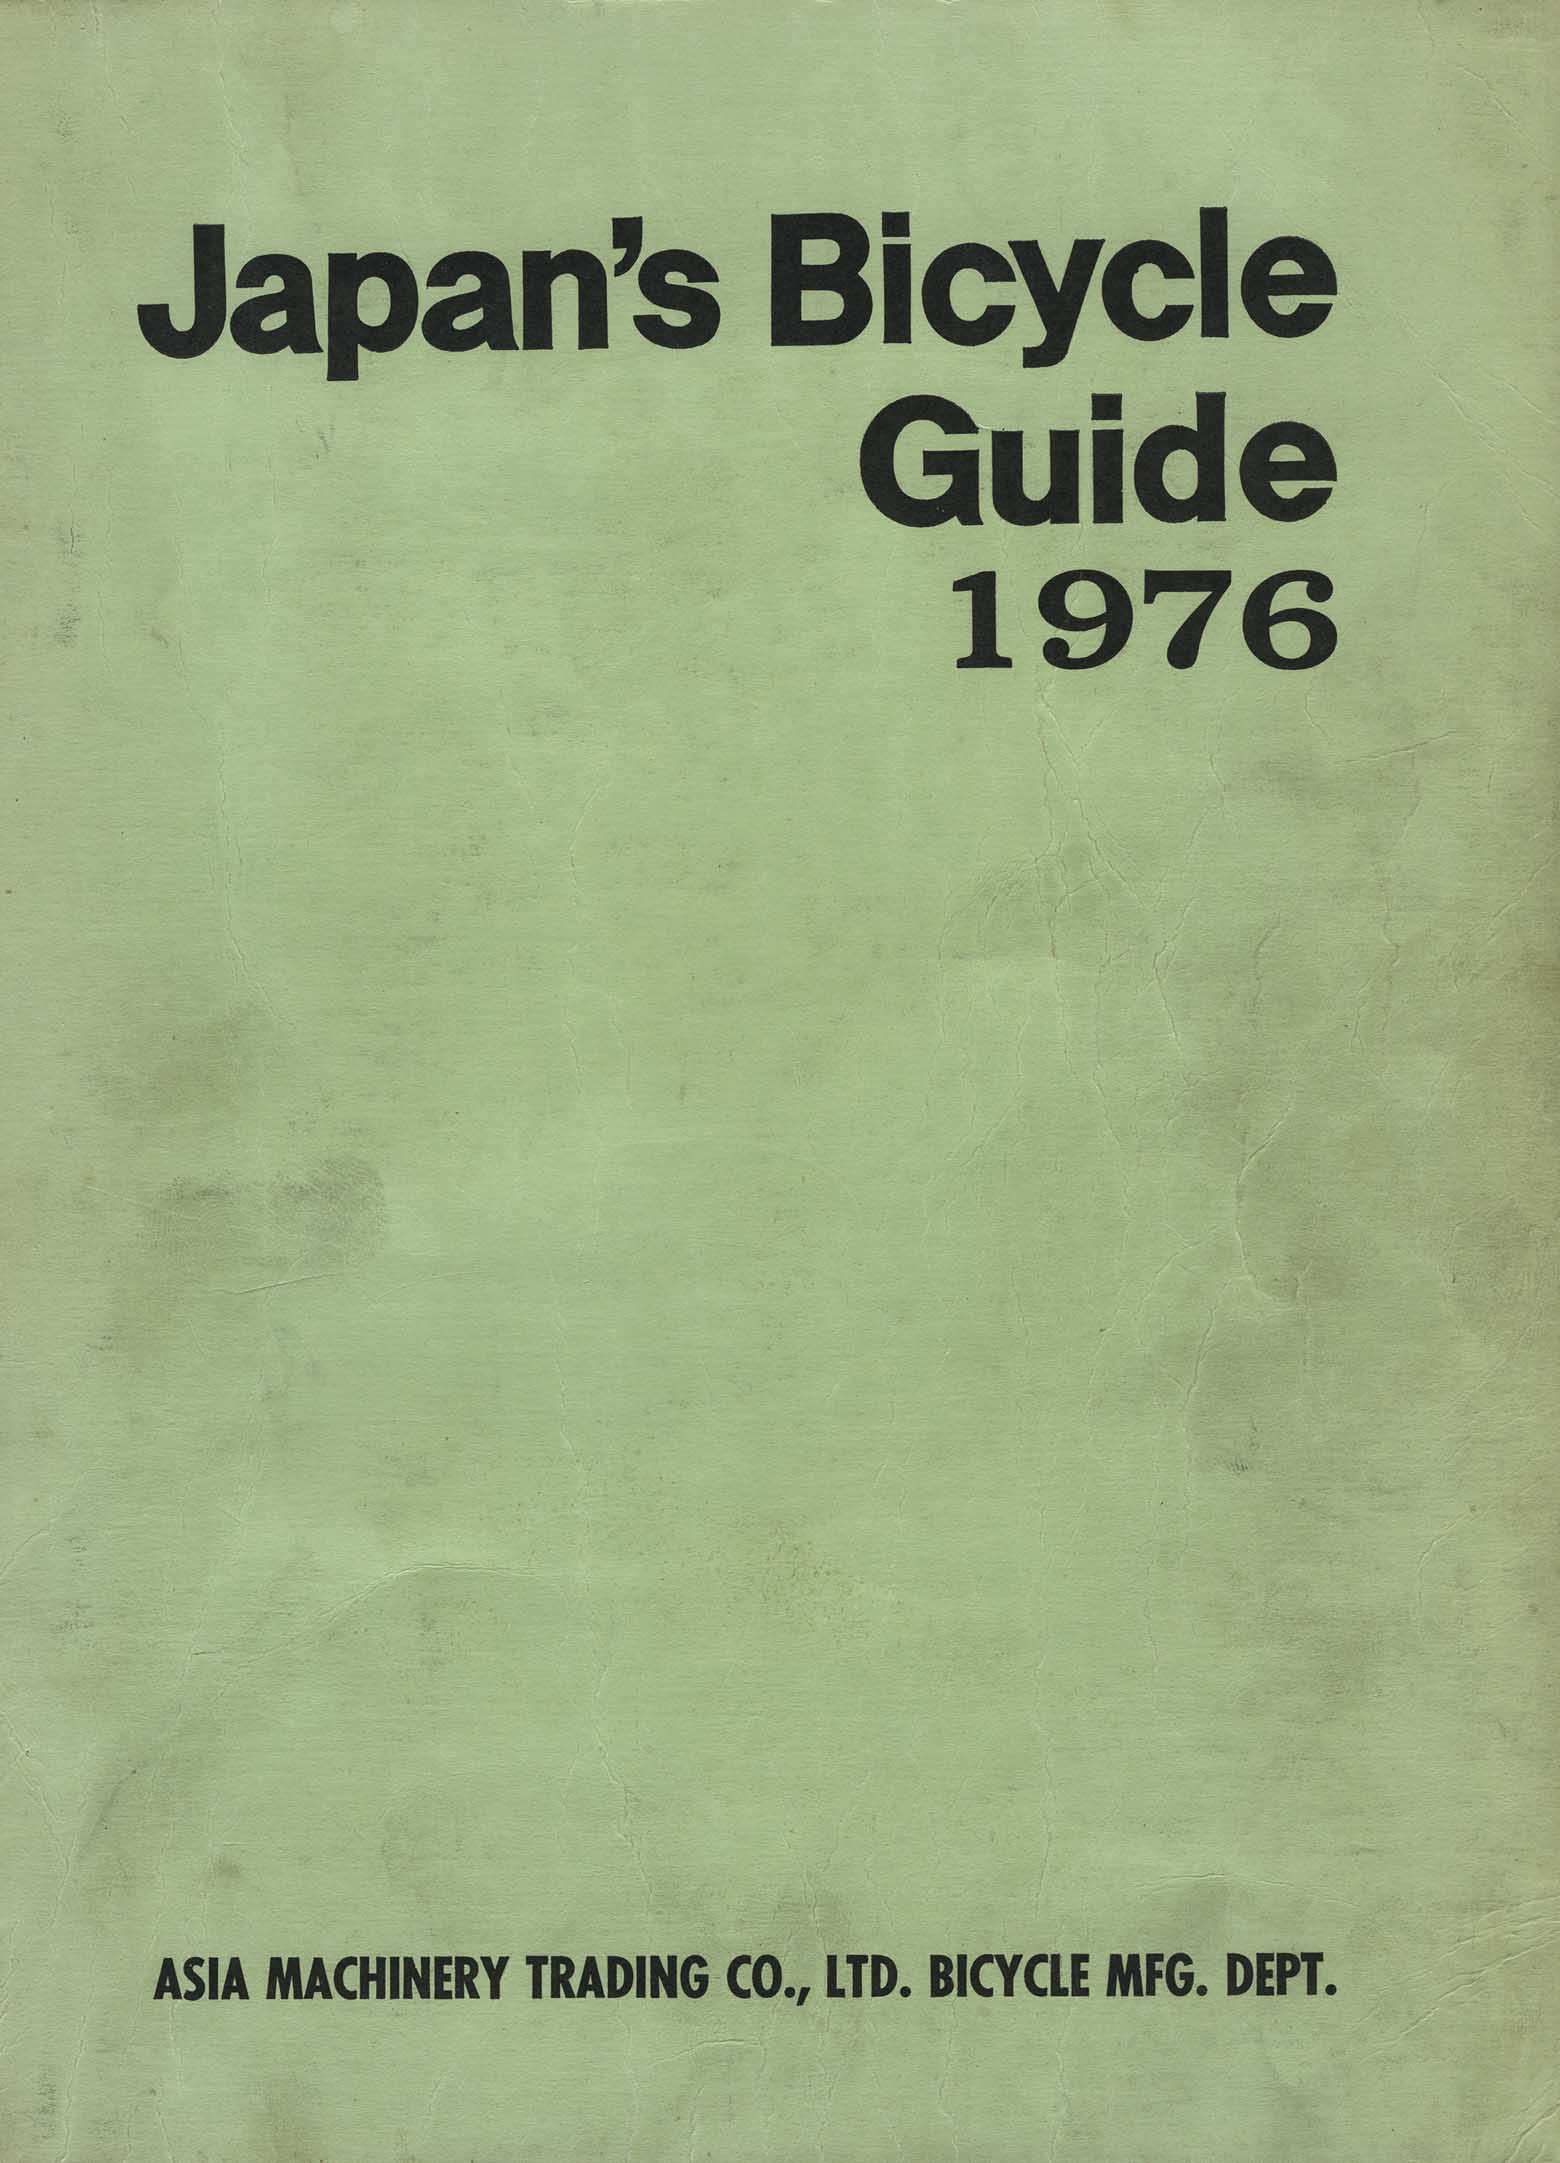 Japan's Bicycle Guide 1976 - front cover main image